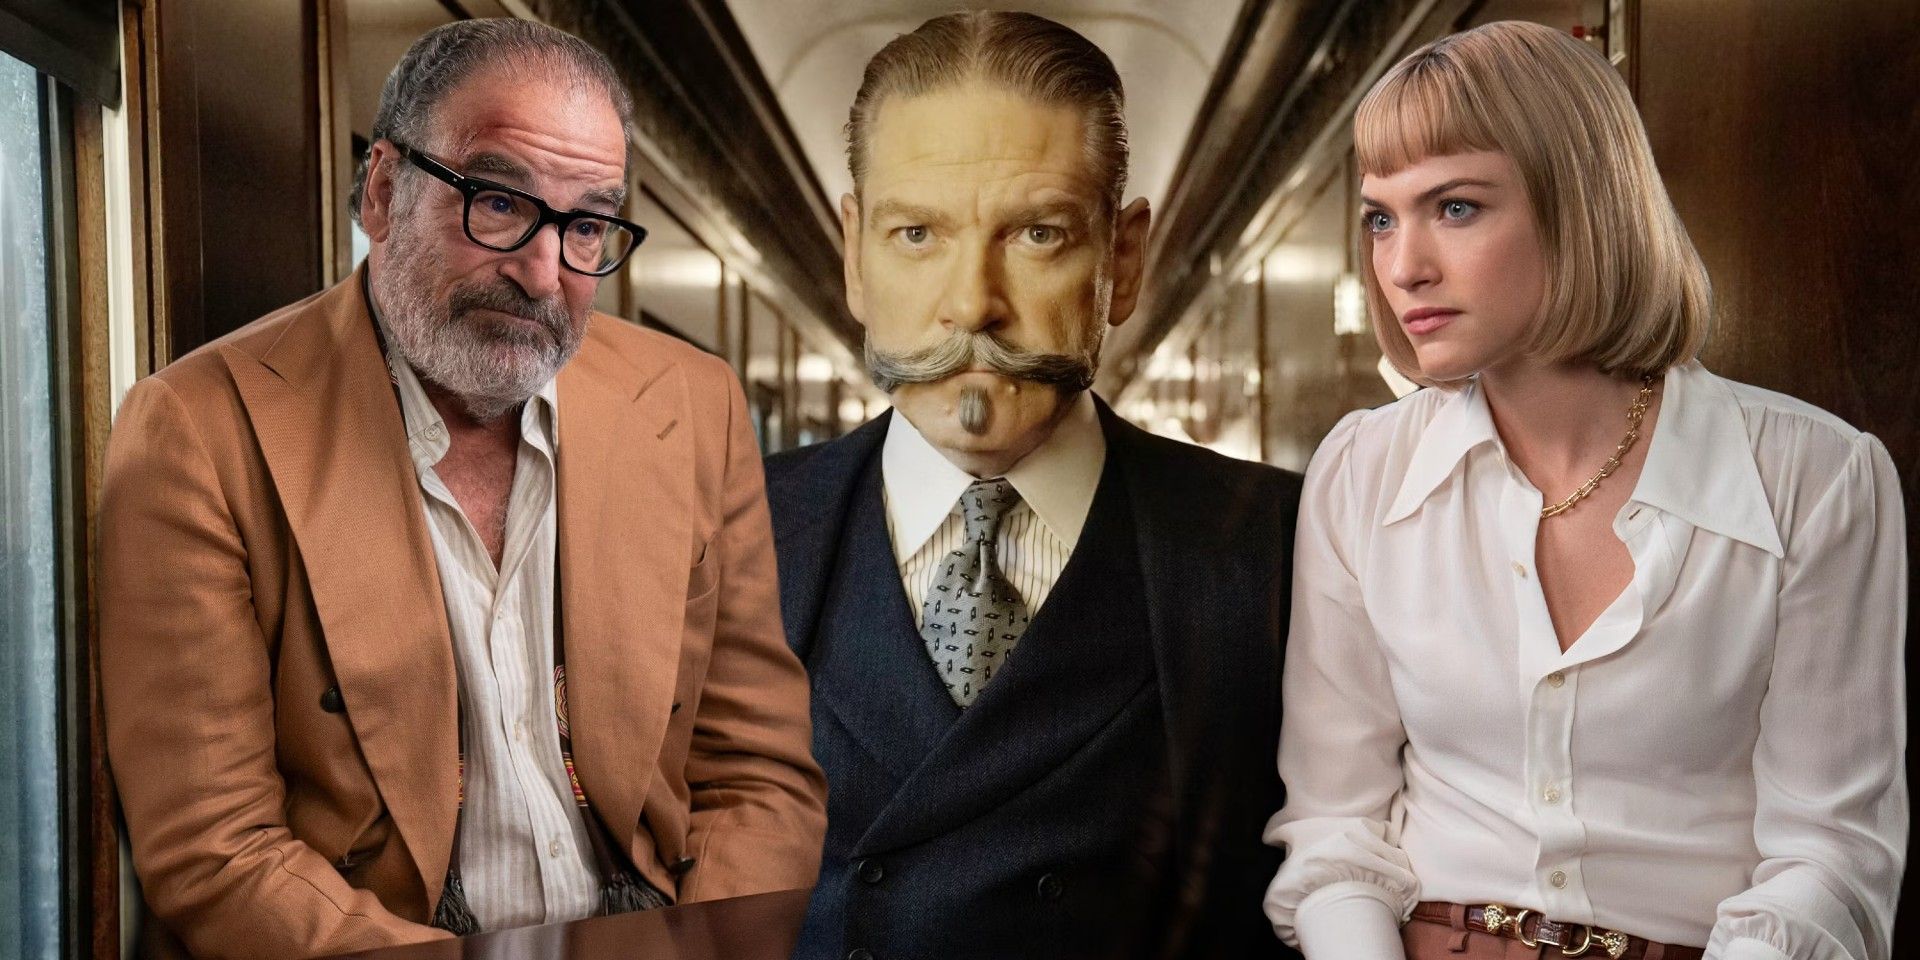 Rufus Cotesworth (Mandy Patinkin) in Death and Other Details, Hercule Poirot (Kenneth Branagh) in Murder on the Orient Express, and Imogene Scott (Violett Beane).